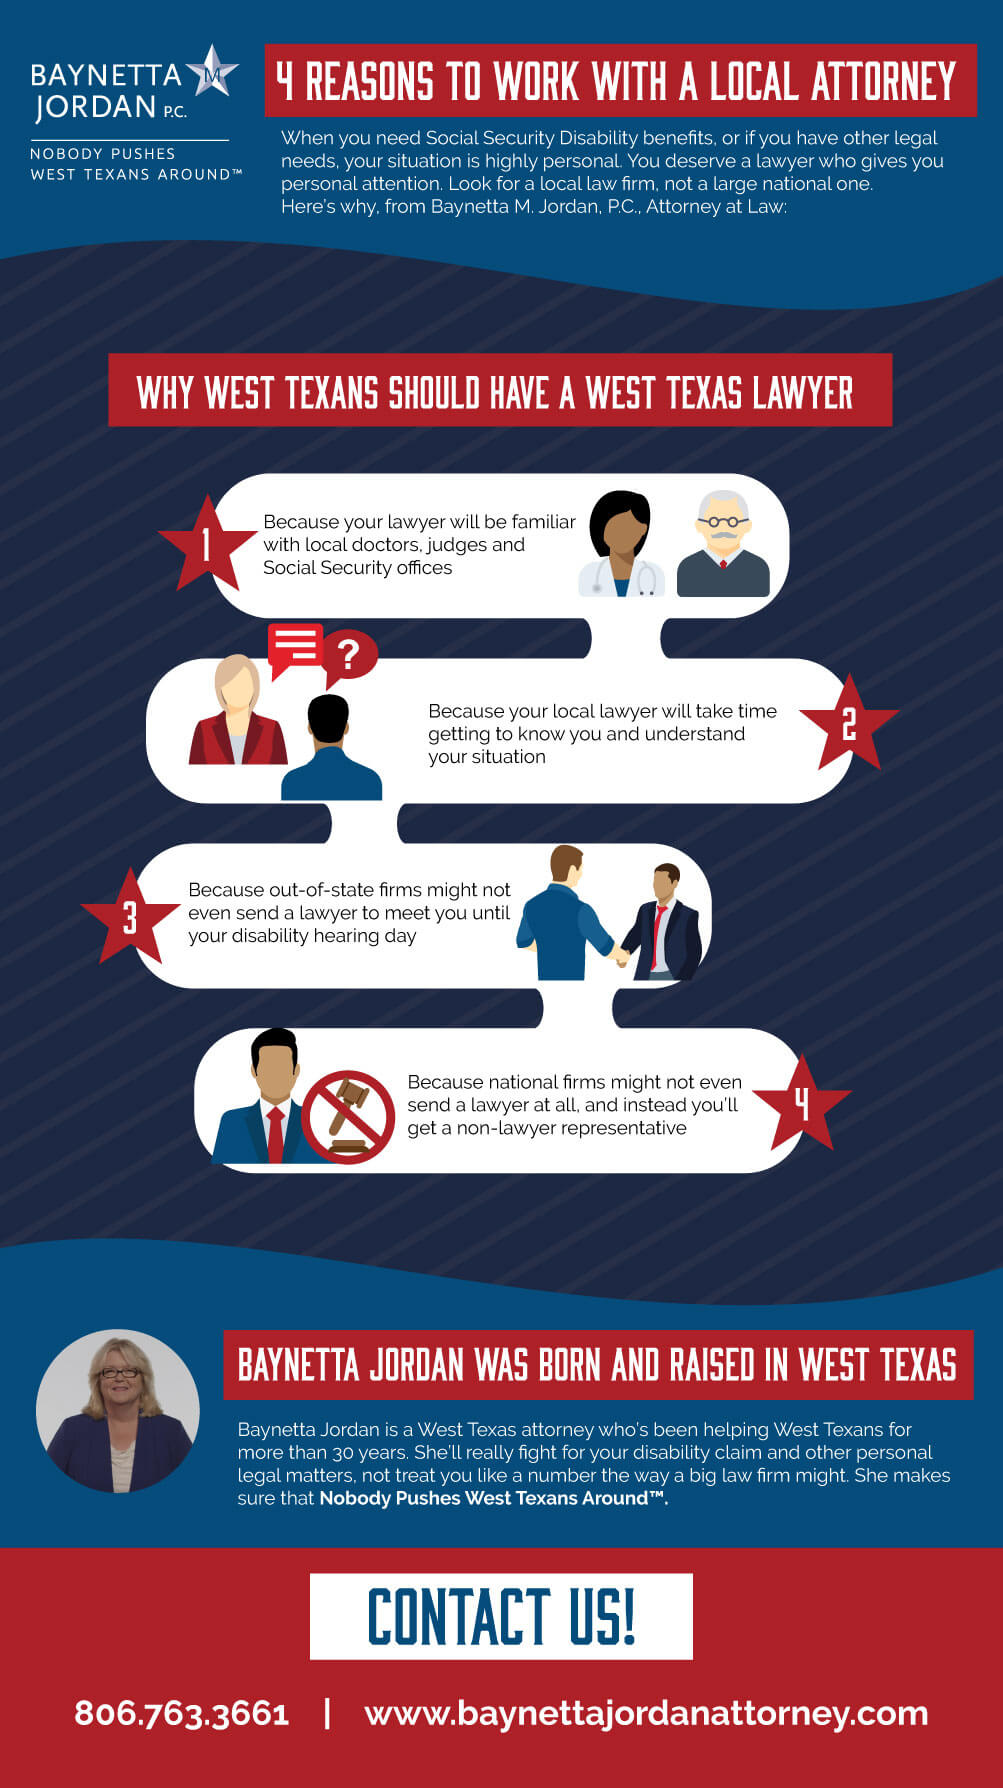 4 Reasons to Work with a Local Attorney Infographic